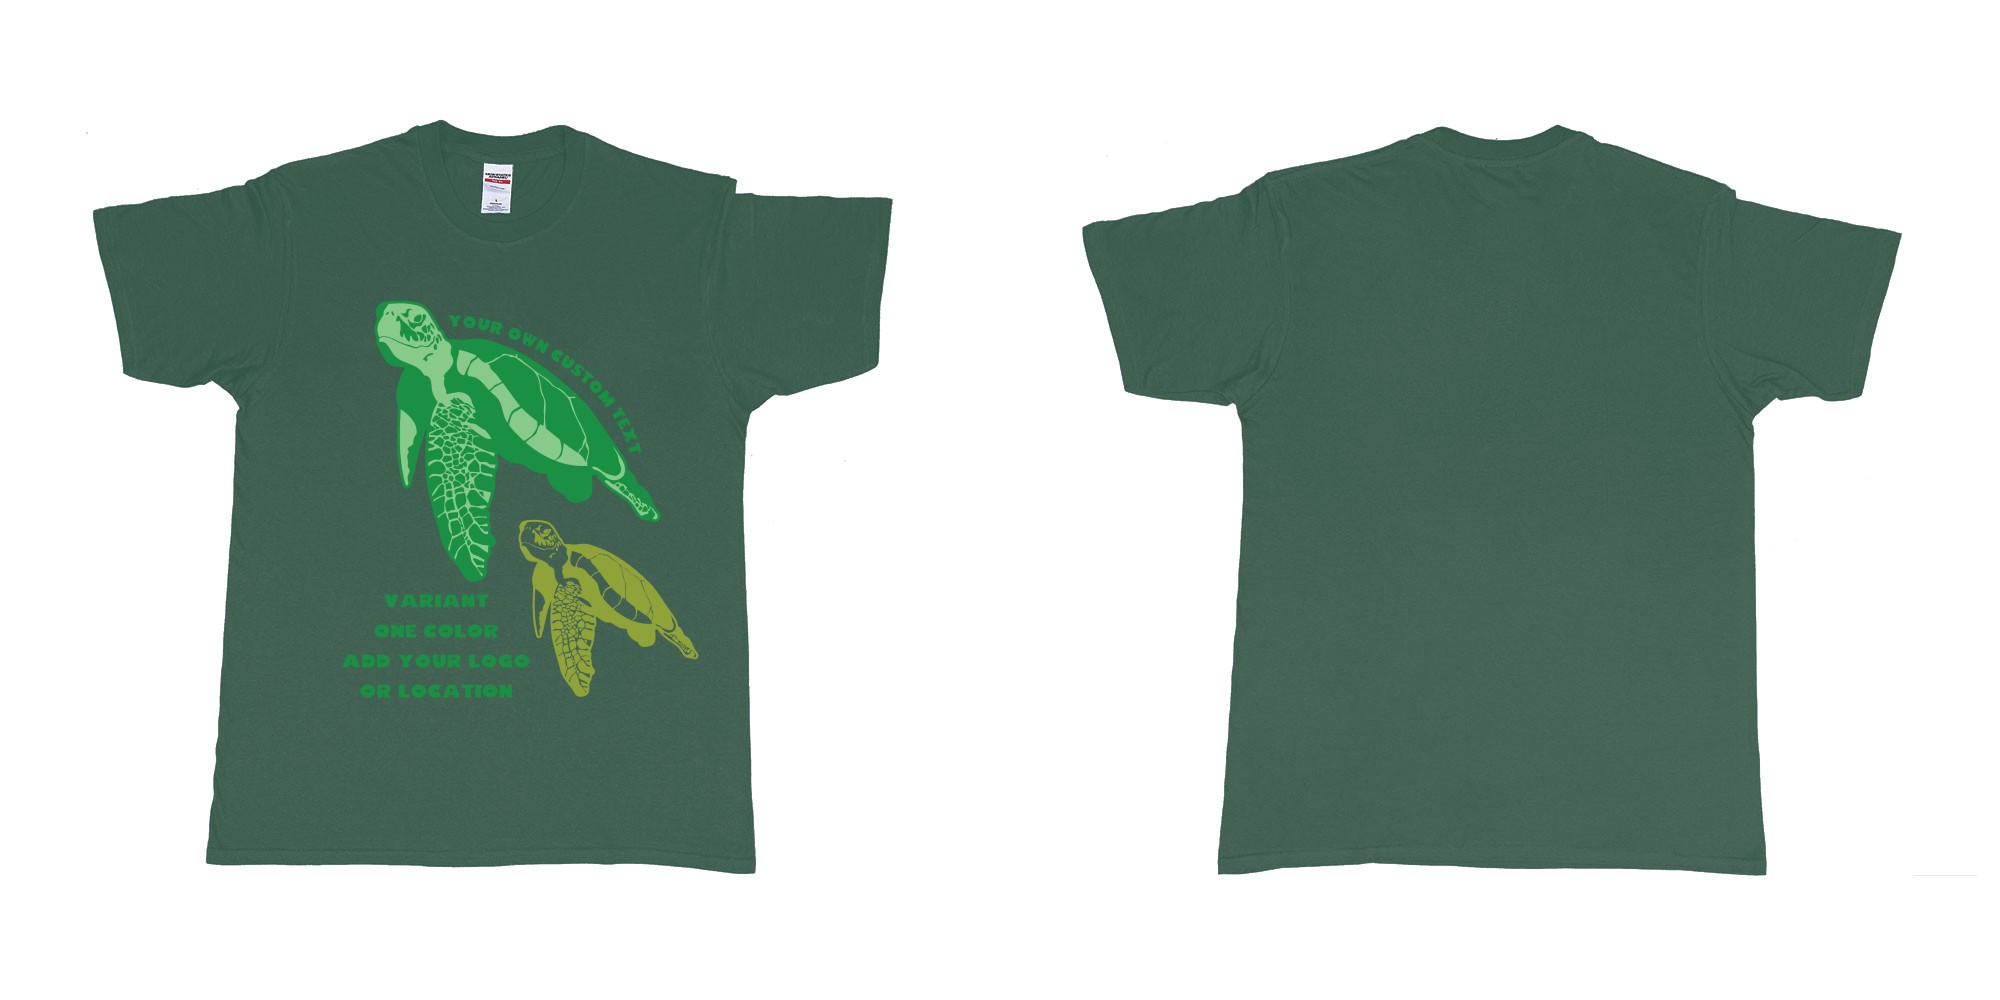 Custom tshirt design hawksbill green sea turtle chilling add logo in fabric color forest-green choice your own text made in Bali by The Pirate Way